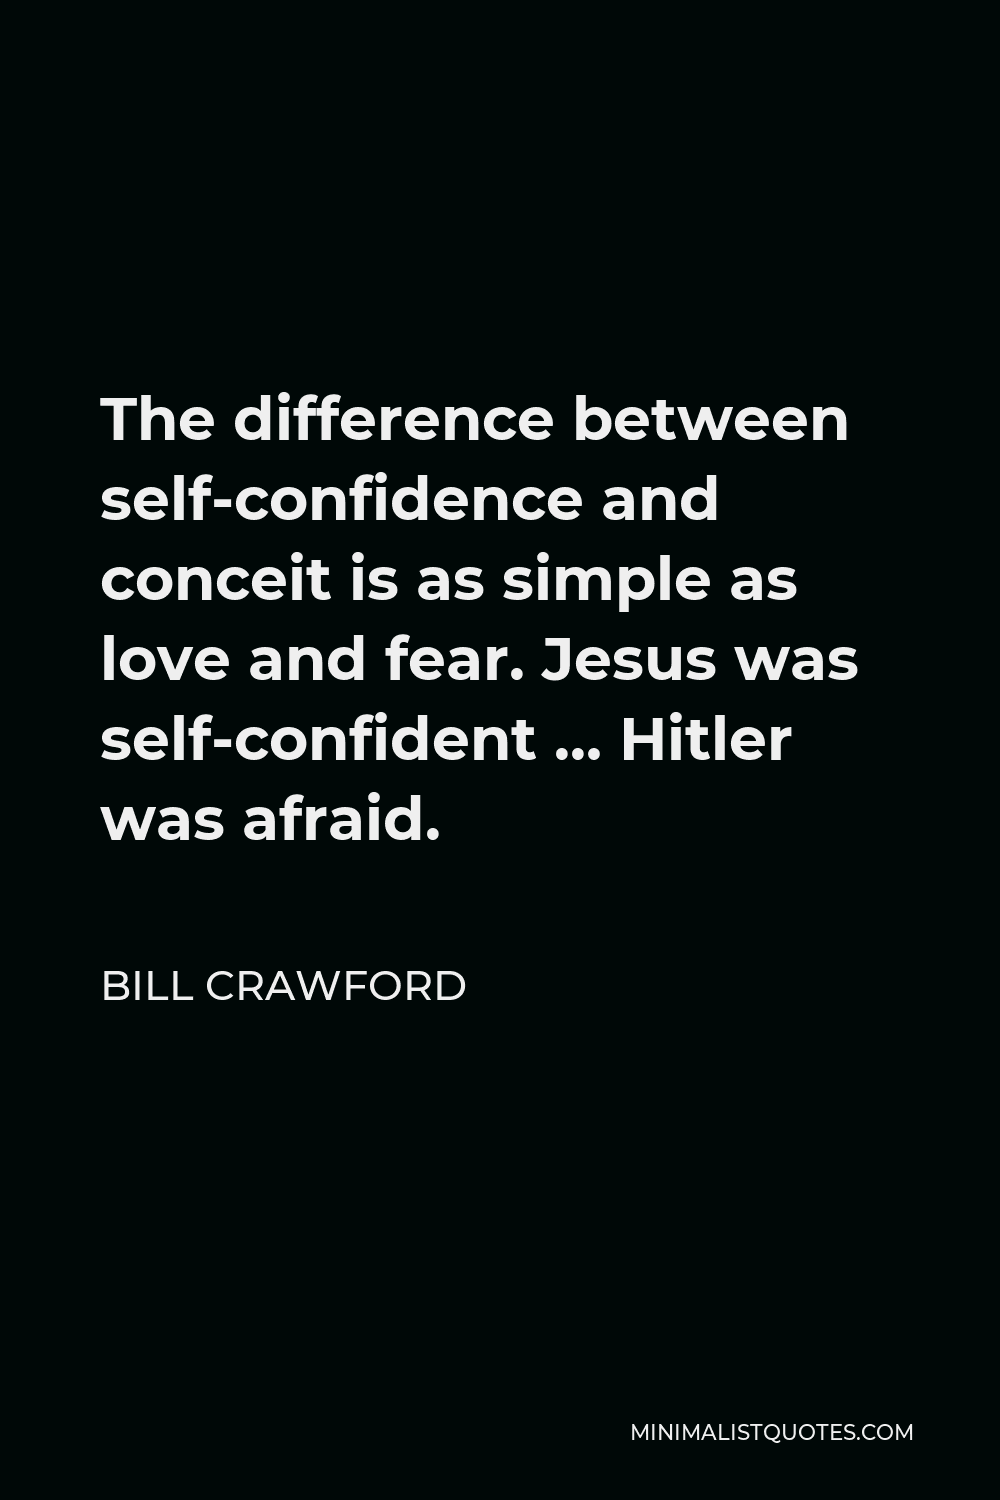 Bill Crawford Quote - The difference between self-confidence and conceit is as simple as love and fear. Jesus was self-confident … Hitler was afraid.